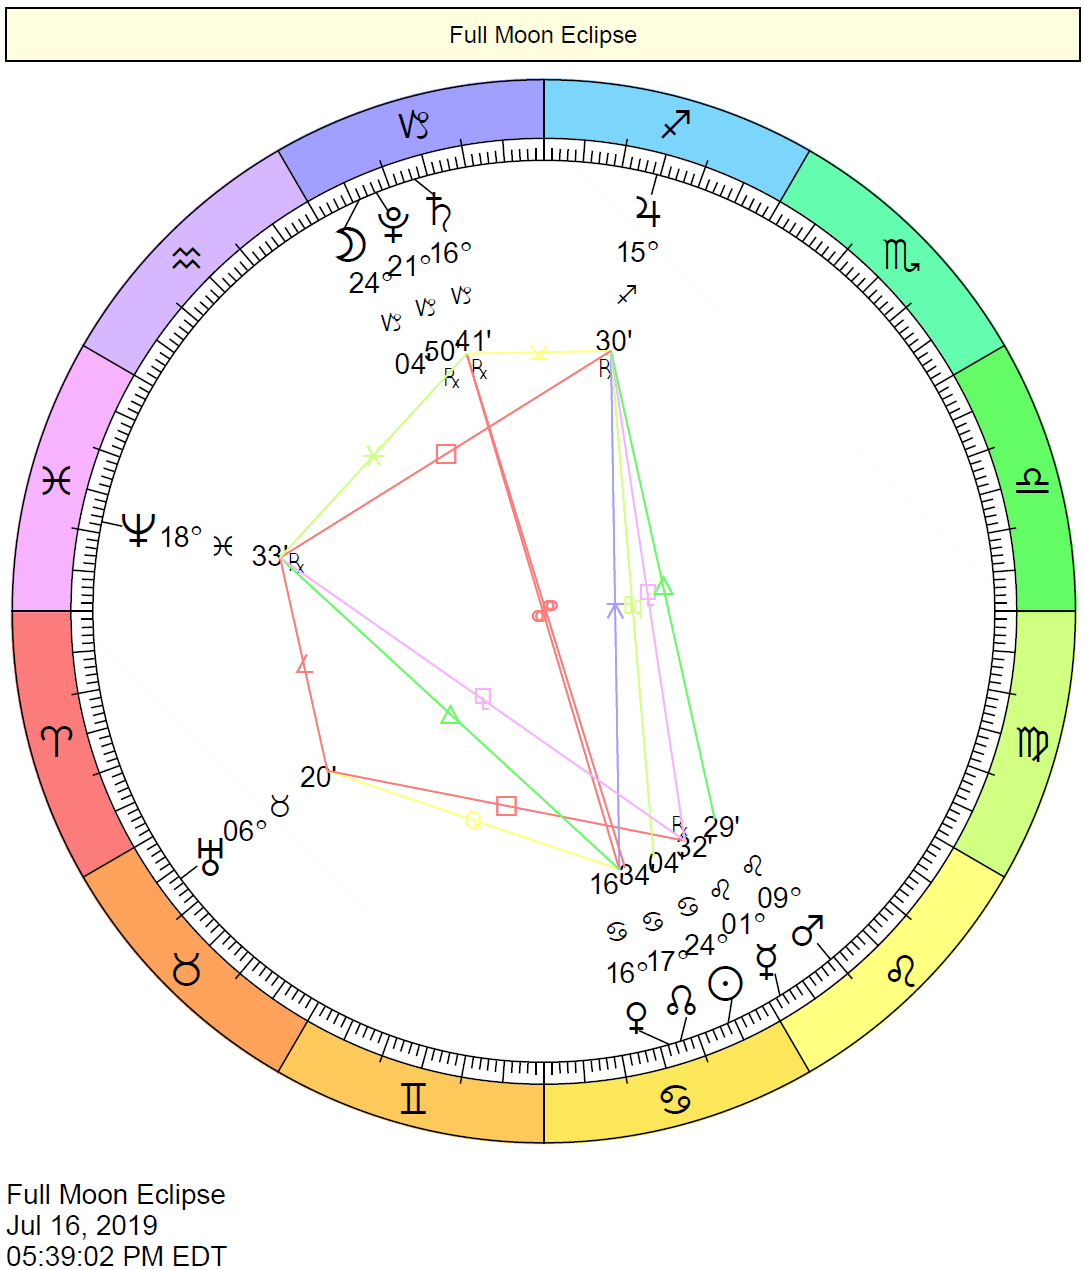 Full Moon/Lunar Eclipse chart wheel reveals the Sun in opposition to the Moon